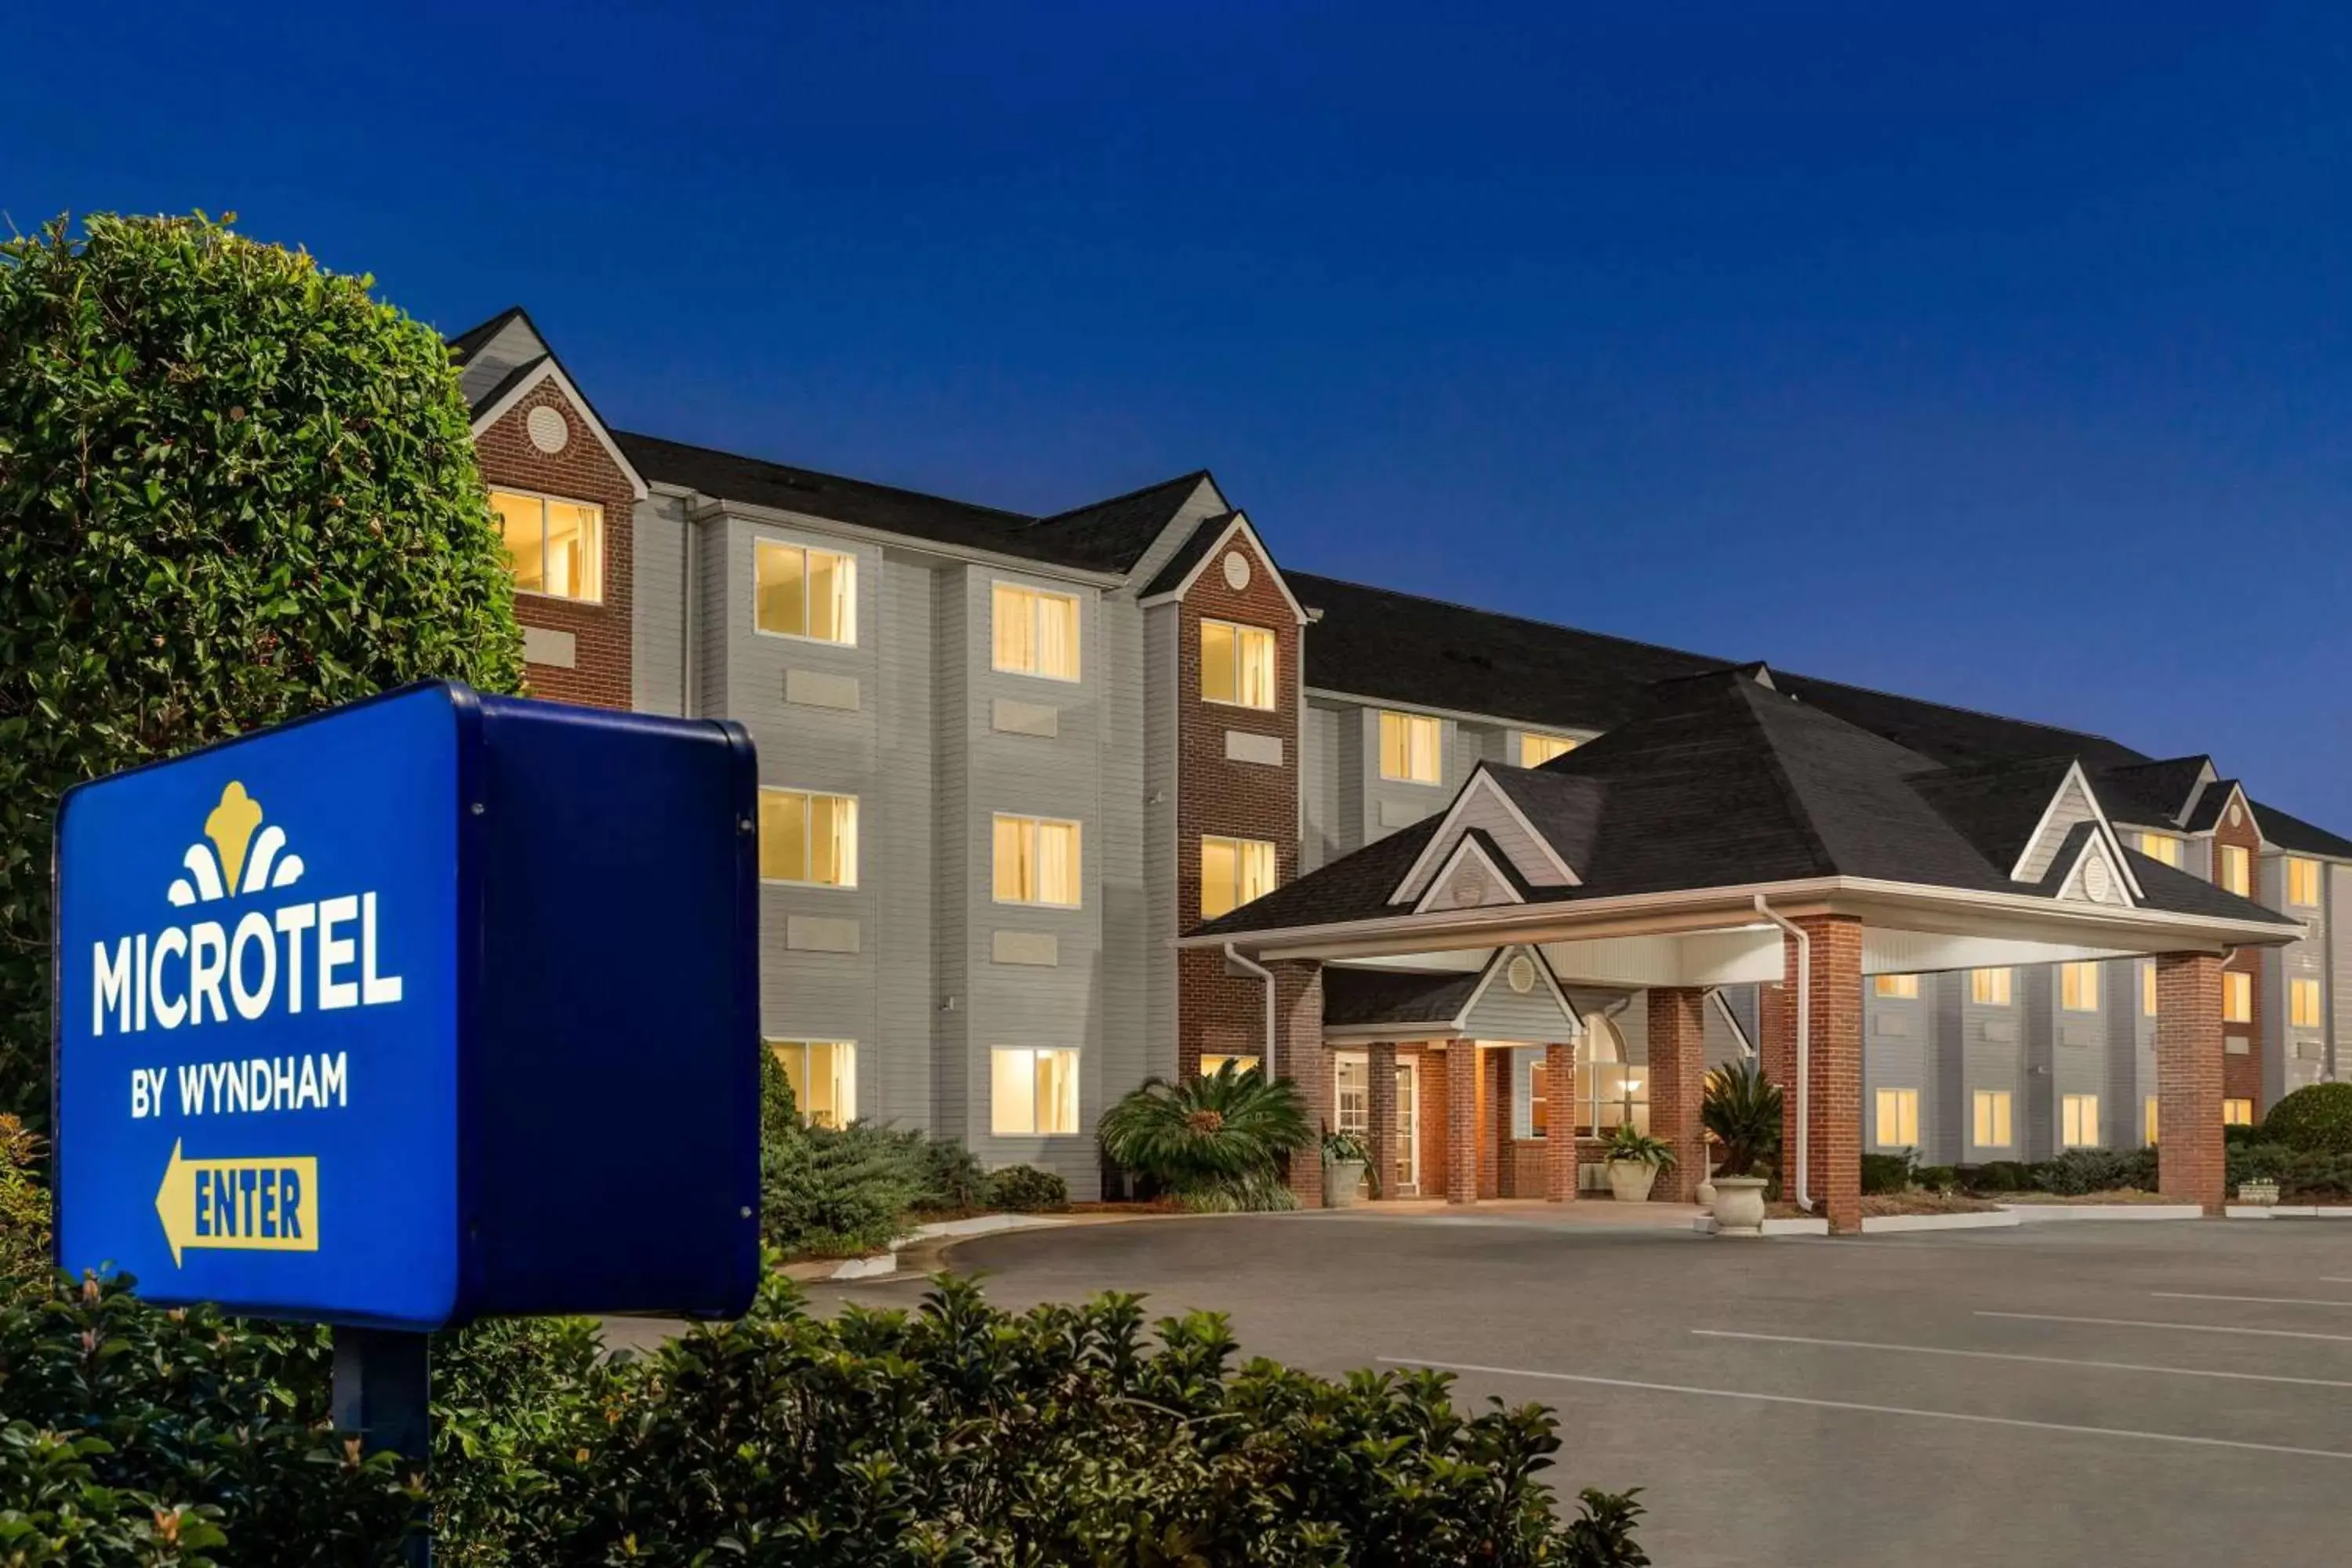 Property building in Microtel Inn & Suites by Wyndham